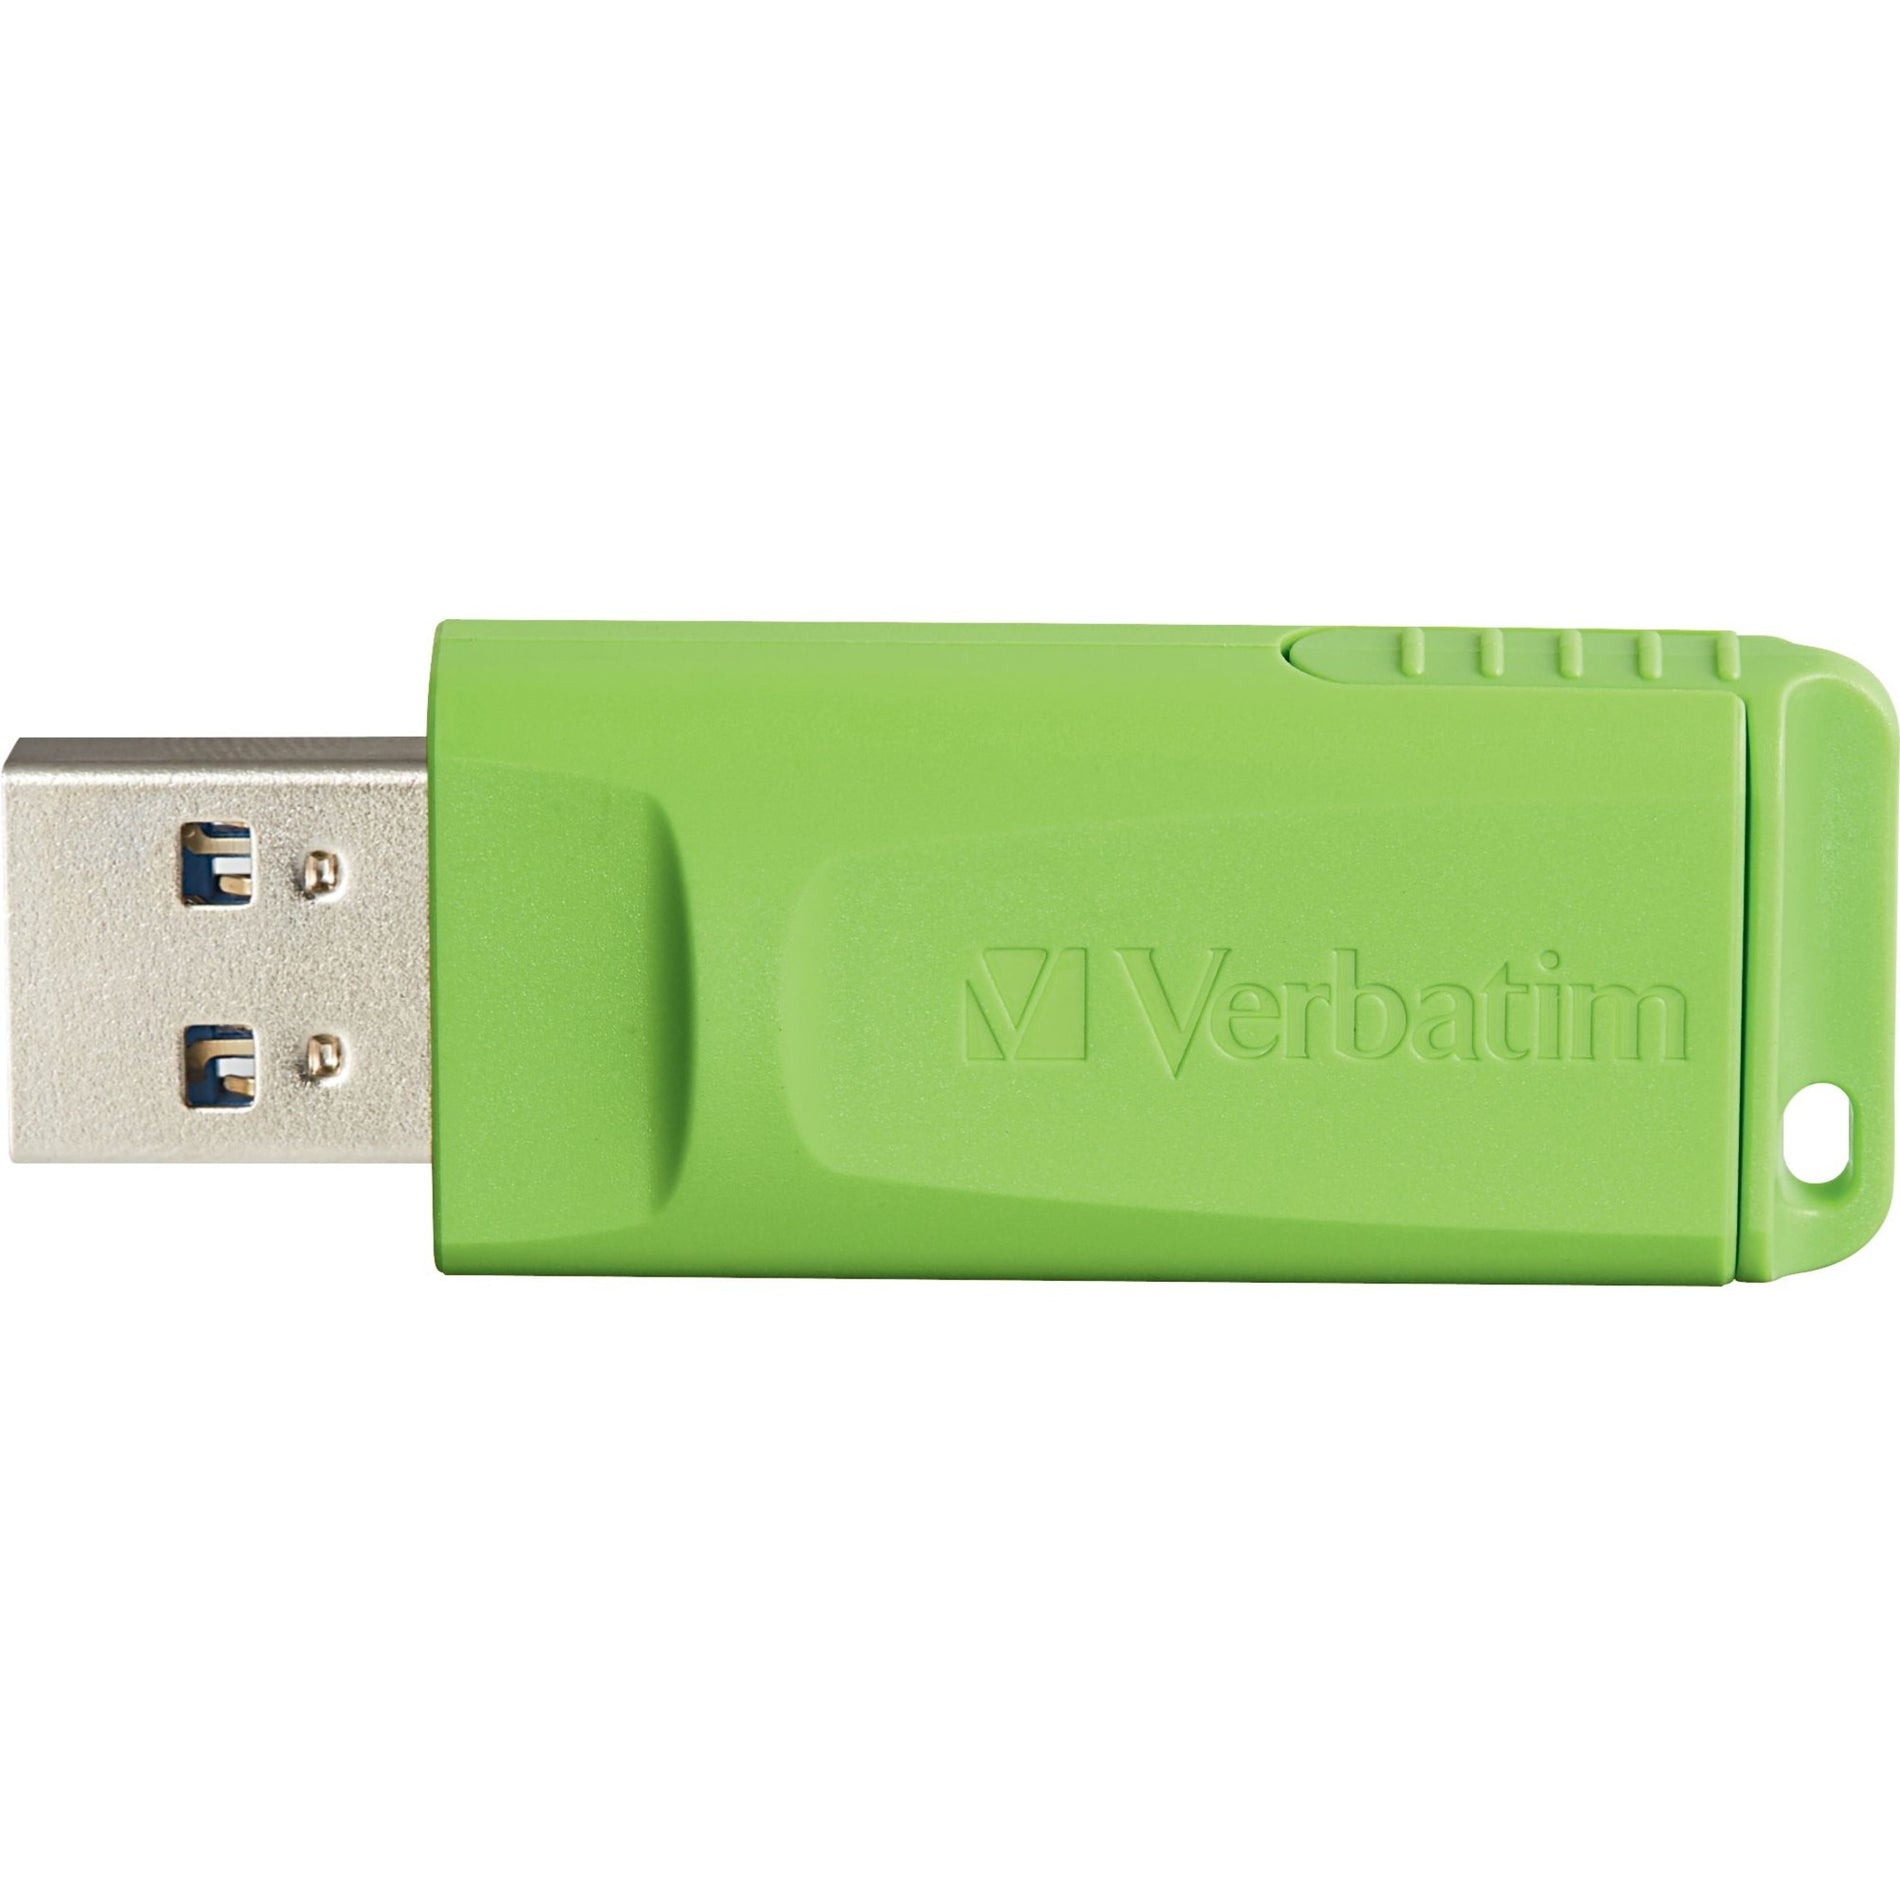 Microban 99123 Store 'n' Go 16GB USB Flash Drive Pack, Antimicrobial, Password Protection, Capless, Retractable